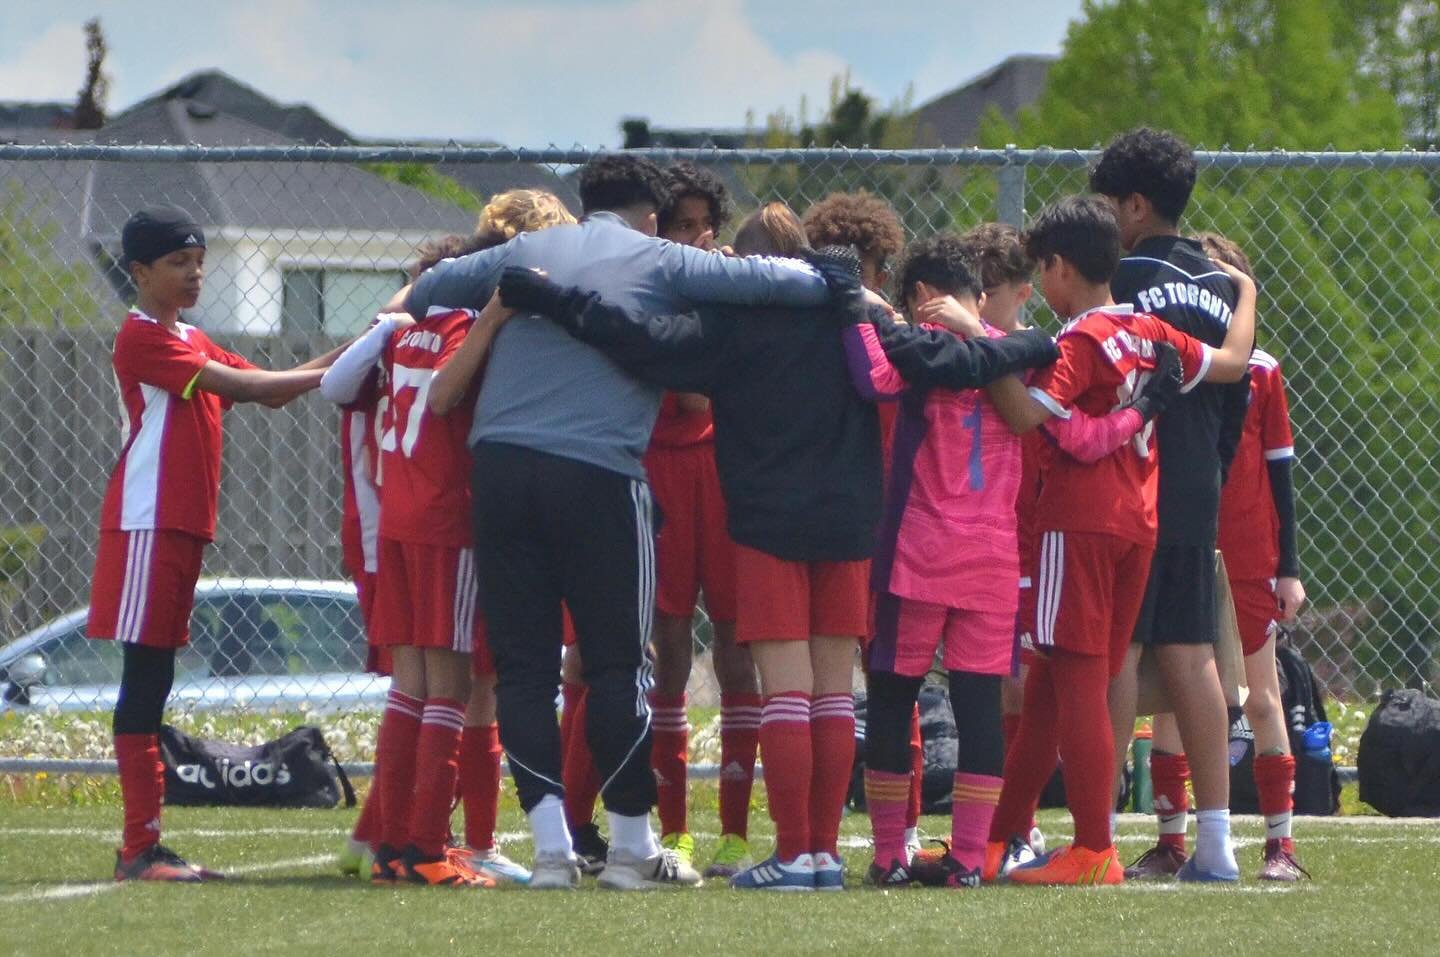 WHAT A WEEKEND ! 

Our U13&rsquo;s were busy this past weekend in IMODEL qualification with 4 qualifying games. They went 4-0 winning all 4 games keeping themselves in the hunt for top of the table in the qualifying rounds. 

 One more weekend to go 